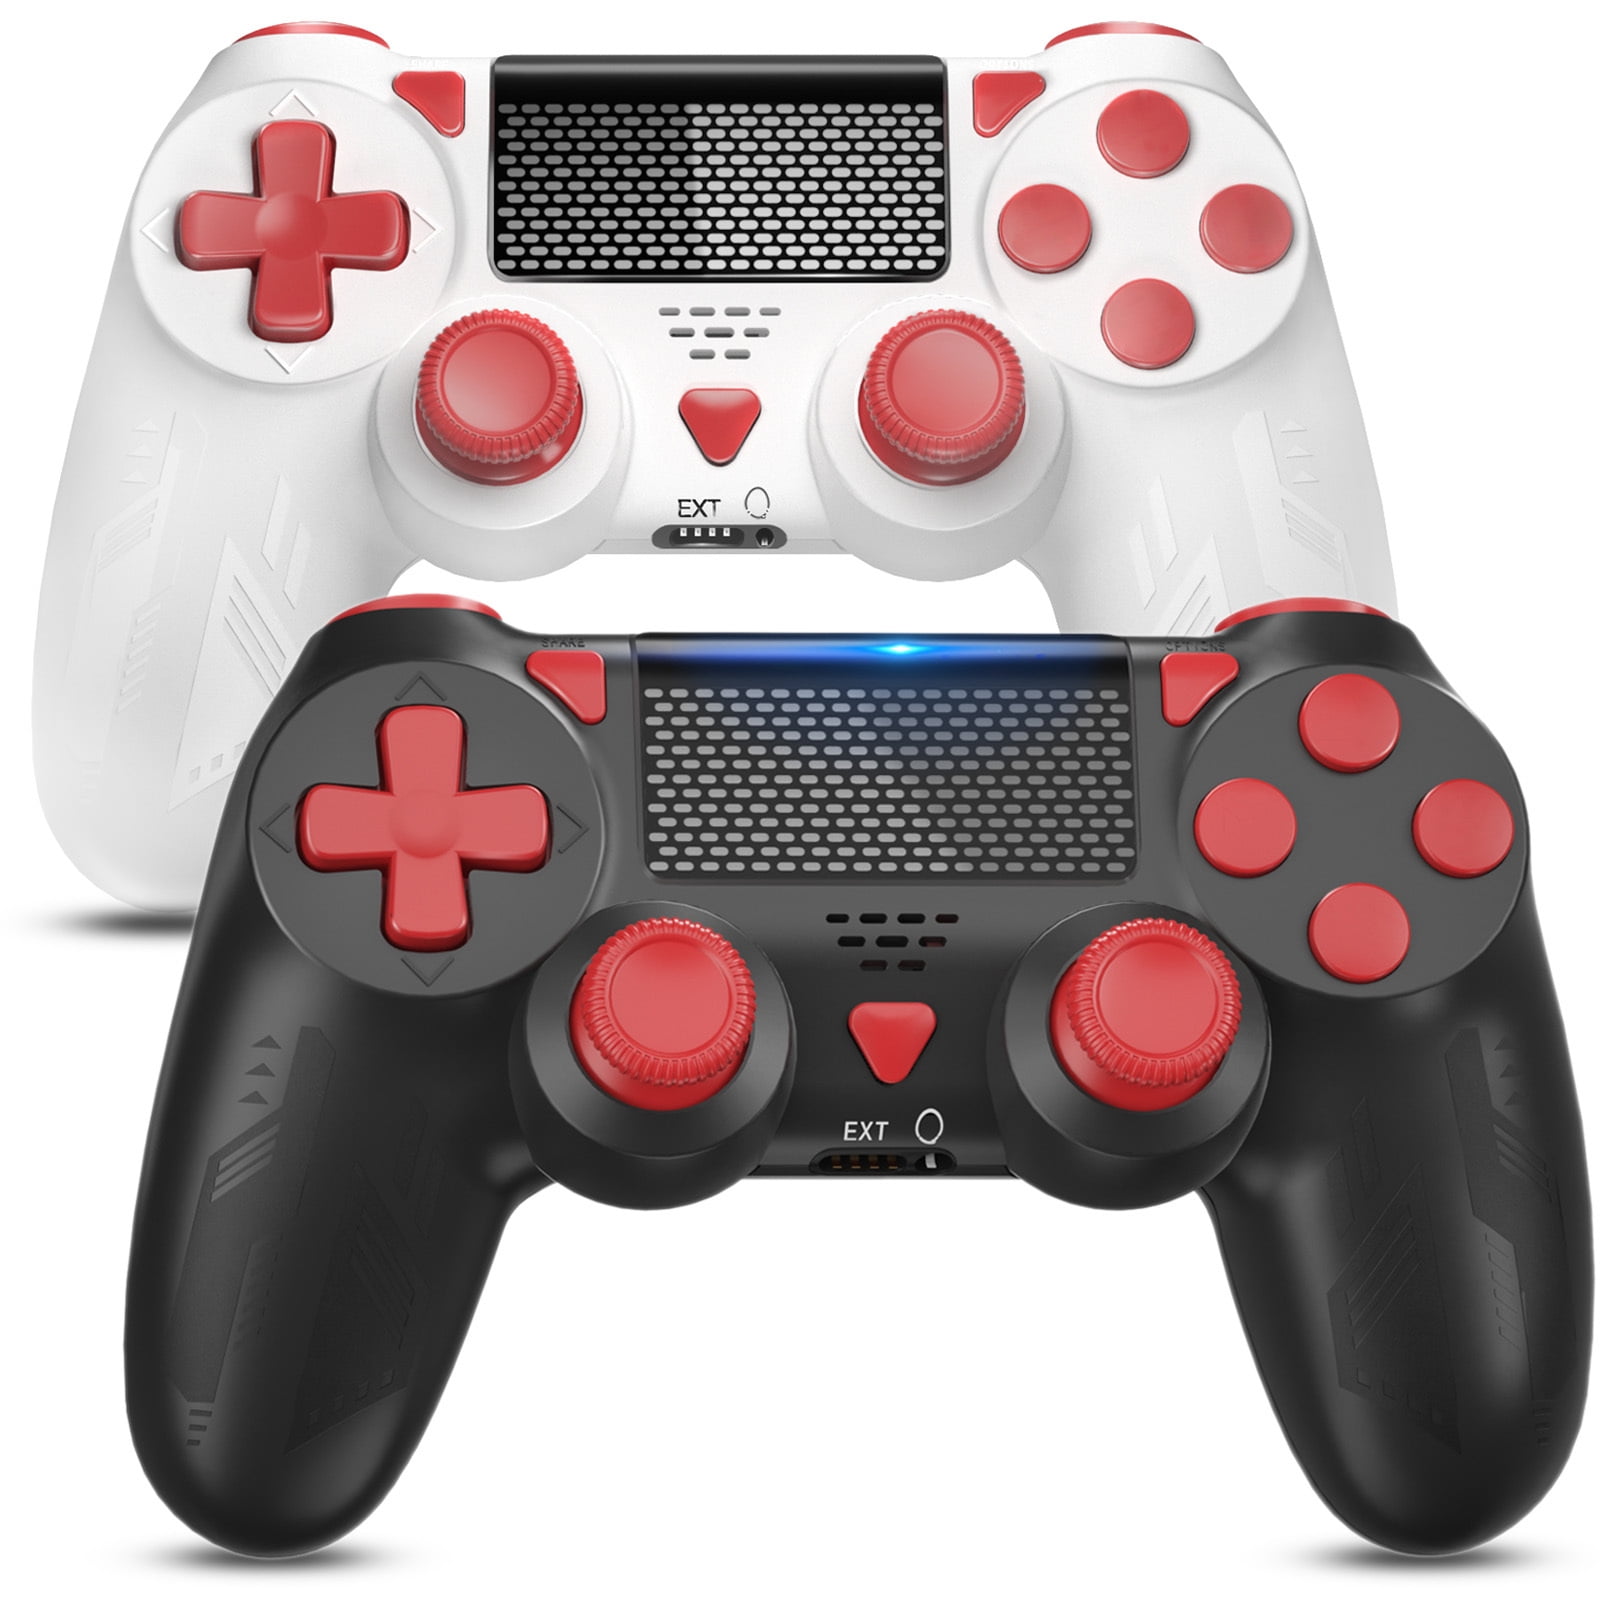 Accepteret Meget rart godt Hovedsagelig Bonadget Wireless Controller for PS4, with USB Cable/1000mAh Battery/Dual  Vibration/6-Axis Motion Control/3.5mm Audio Jack/Multi Touch Pad/Share  Button, PS4 Controller Compatible with PS4/Slim/Pro/PC - Walmart.com